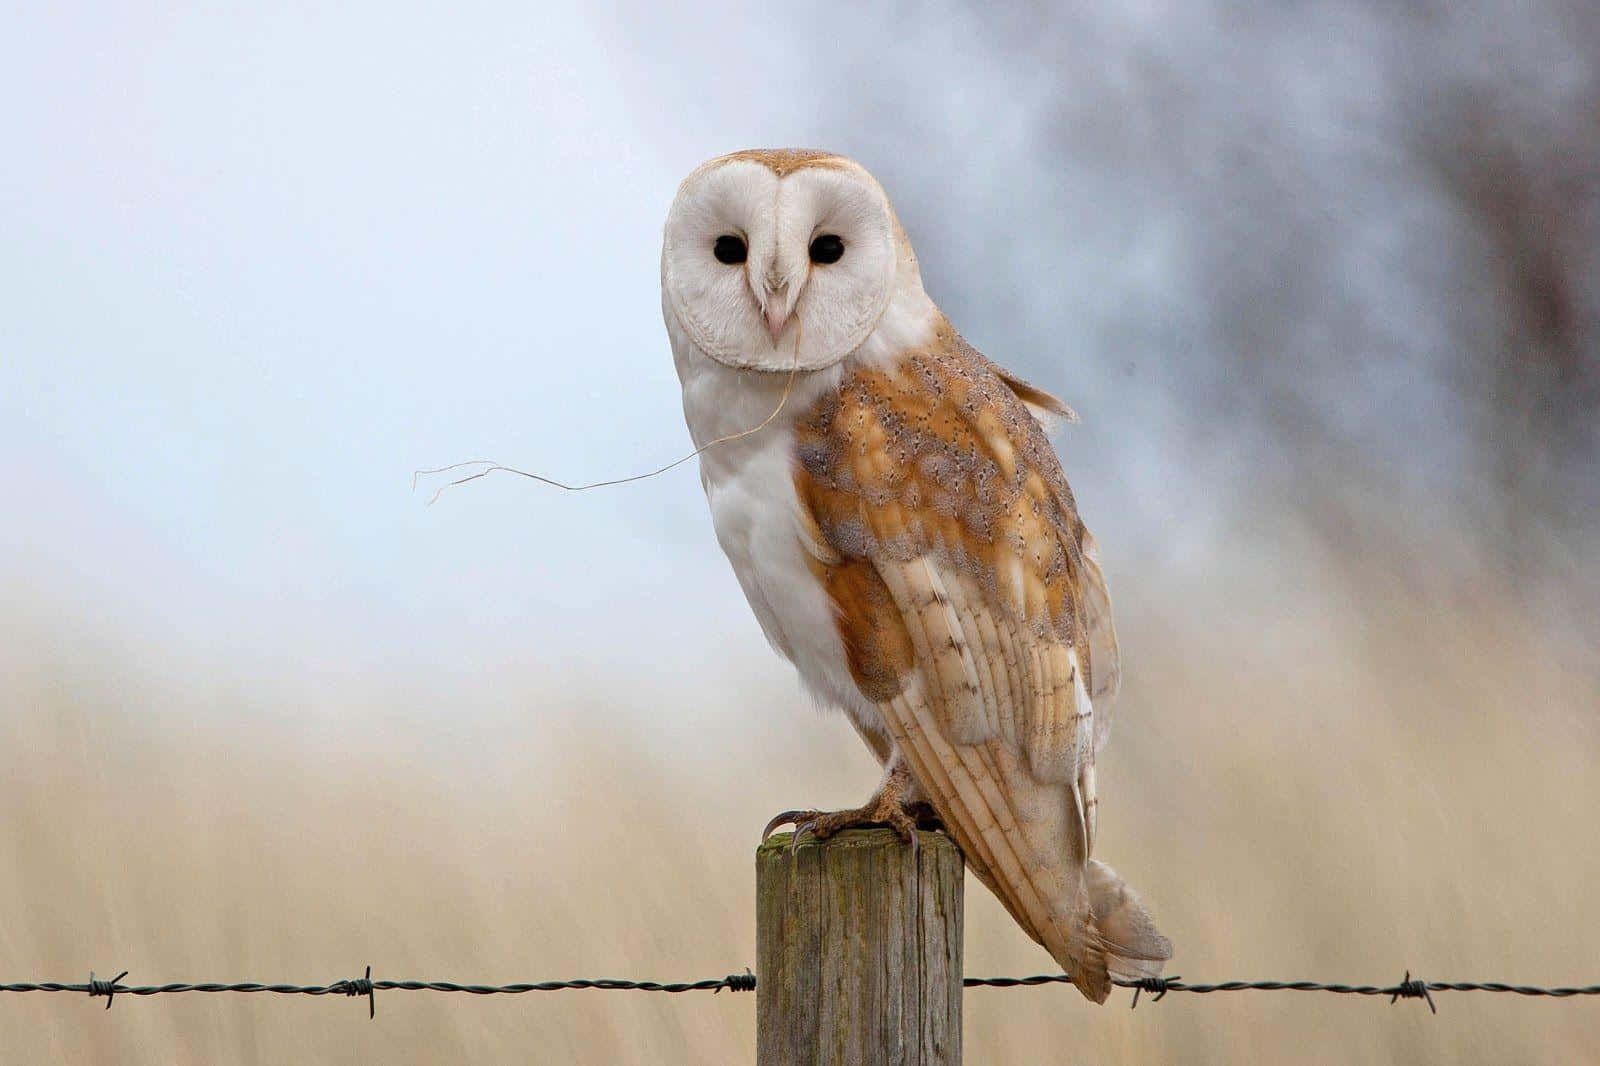 "The Barn Owl – A Wise and Unmistakable Predator"